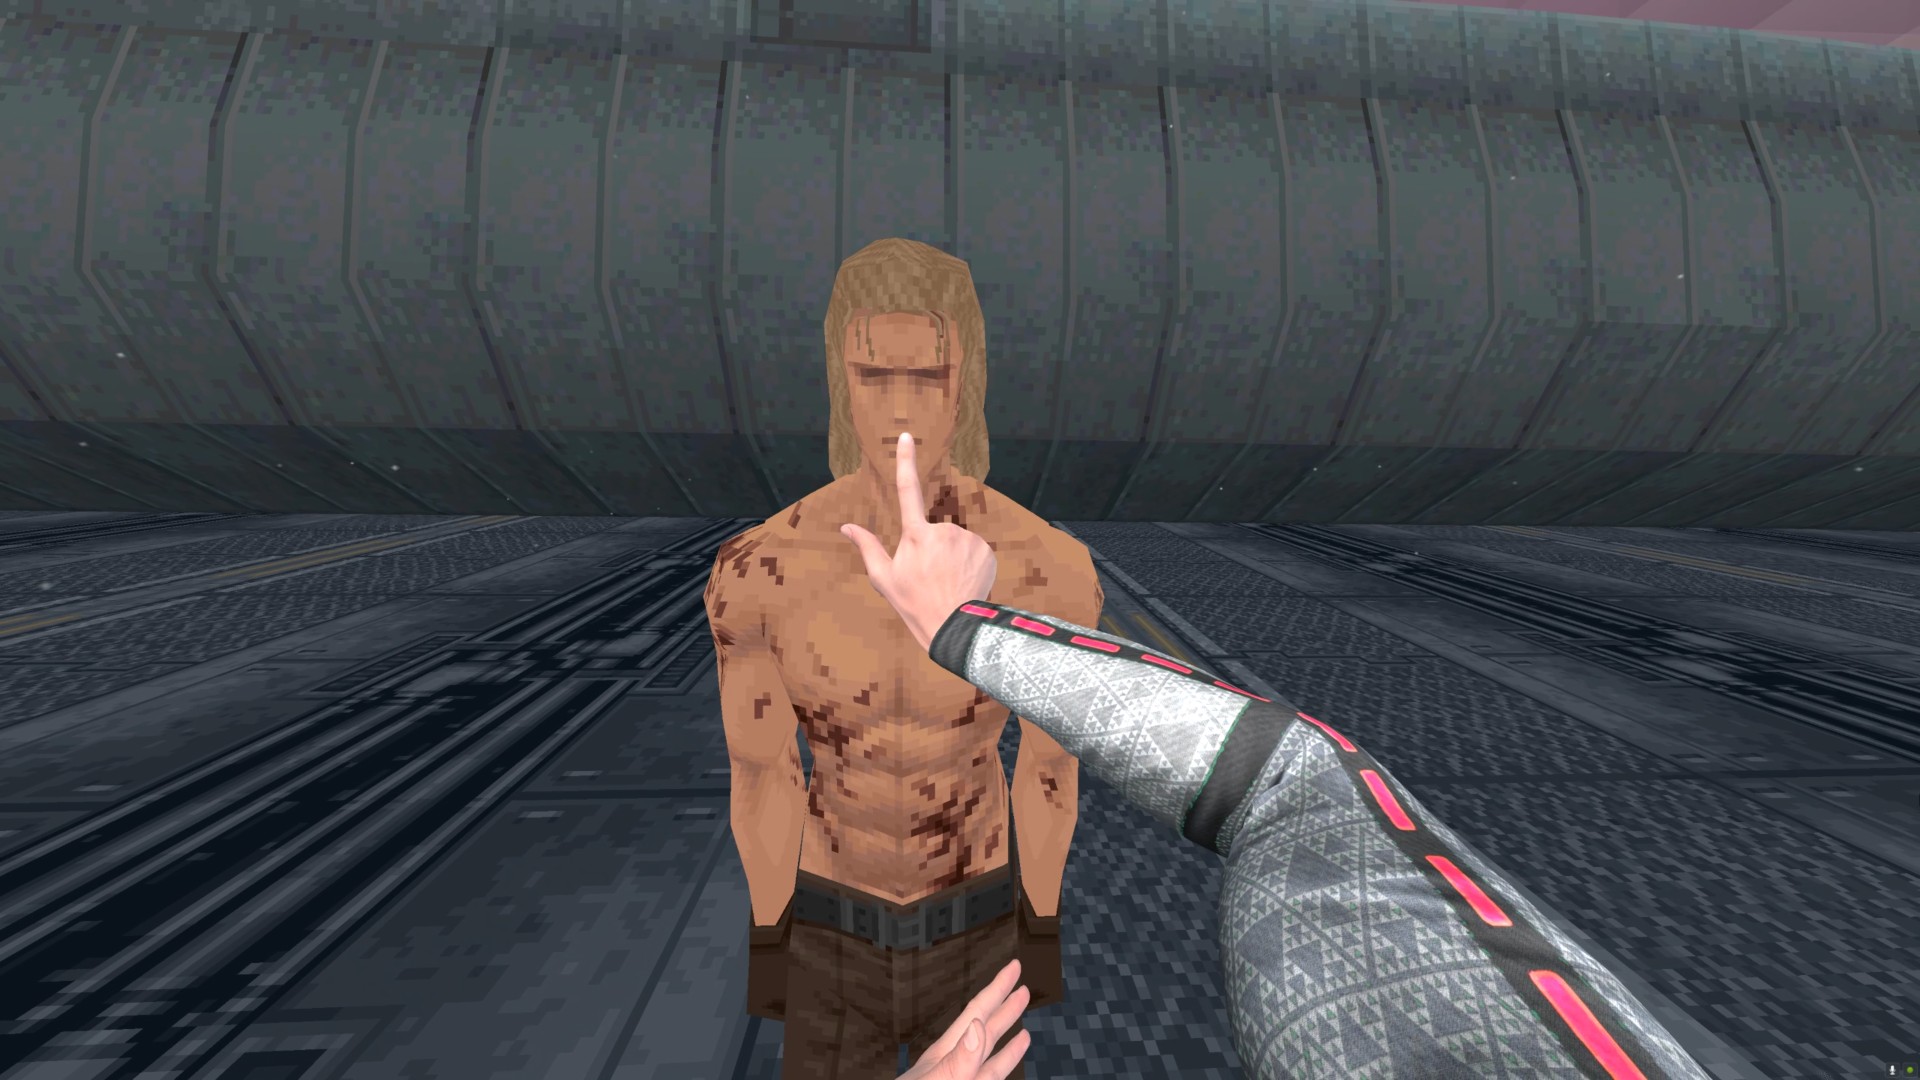 Metal Gear Solid VR mod via Boneworks with plans for Oculus Quest 2. Solid Snake puts a finger to the lips of Liquid Snake in a first-person VR mod.